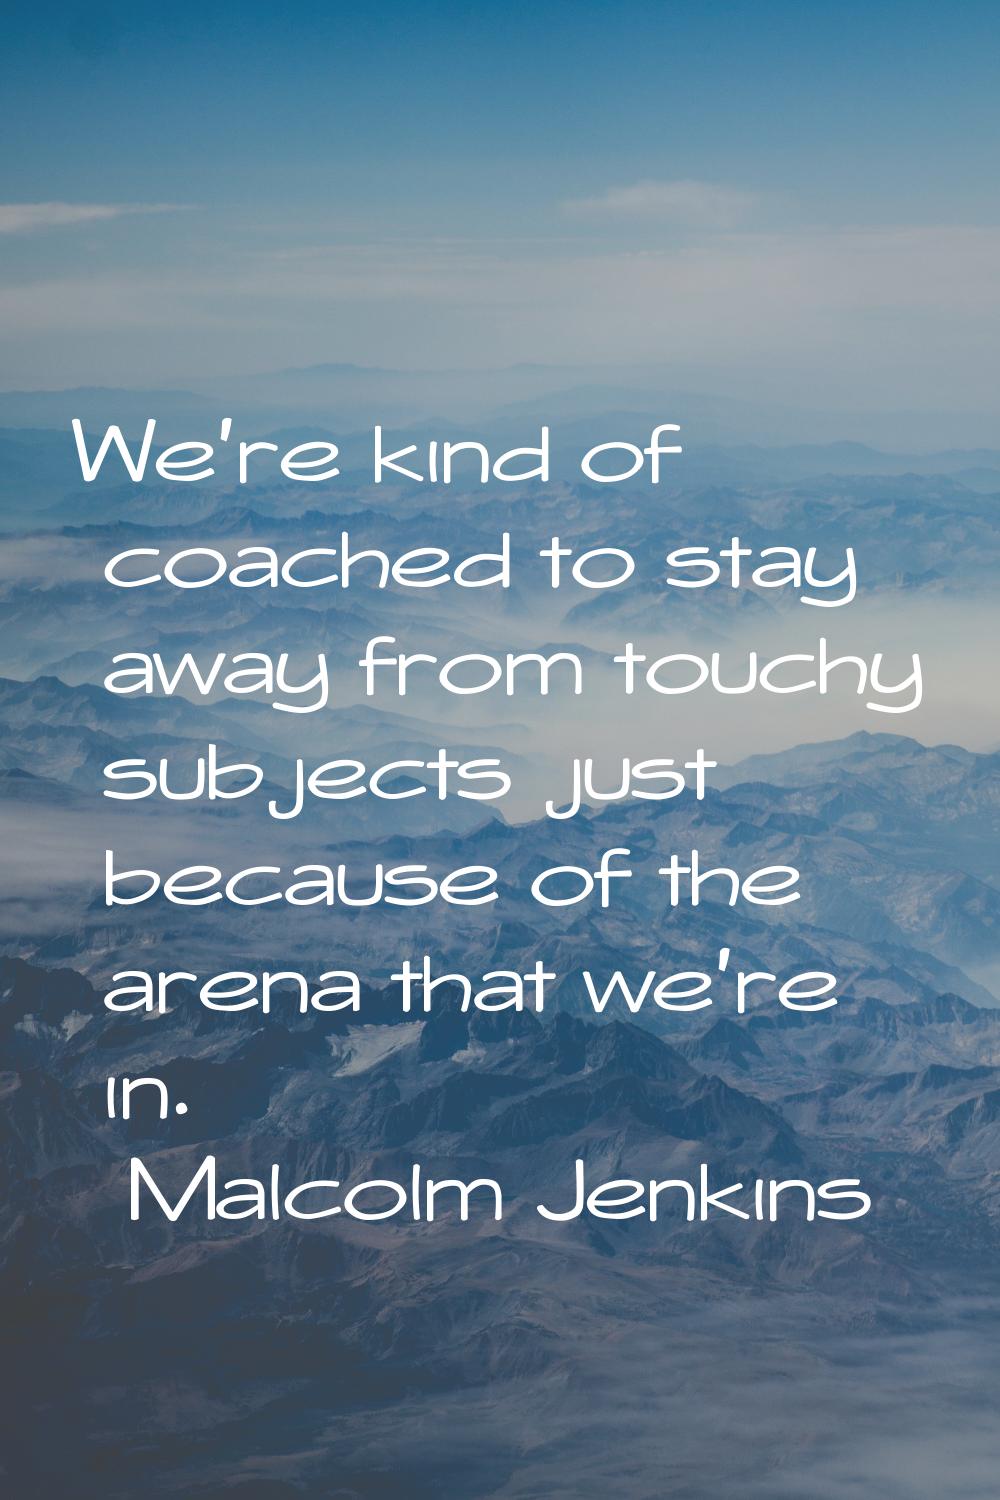 We're kind of coached to stay away from touchy subjects just because of the arena that we're in.